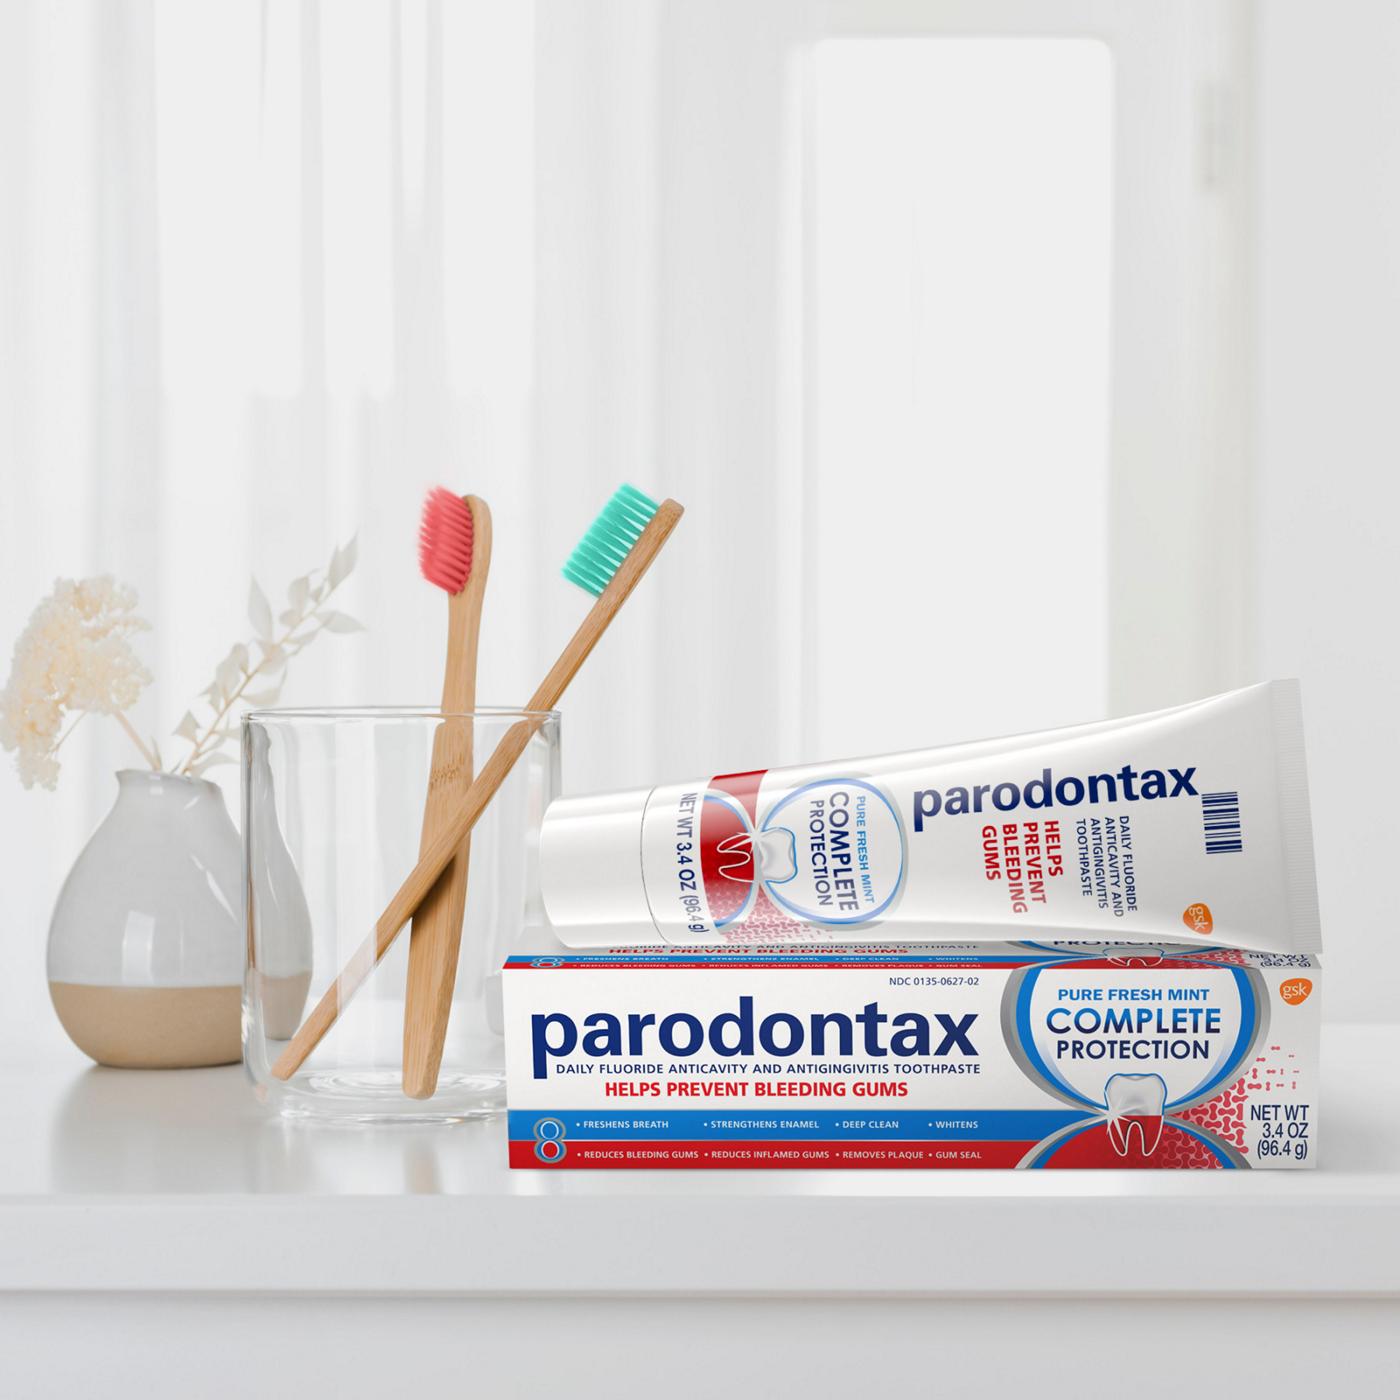 Parodontax Toothpaste for Bleeding Gums - Pure Fresh Mint, 2 Pk; image 6 of 7